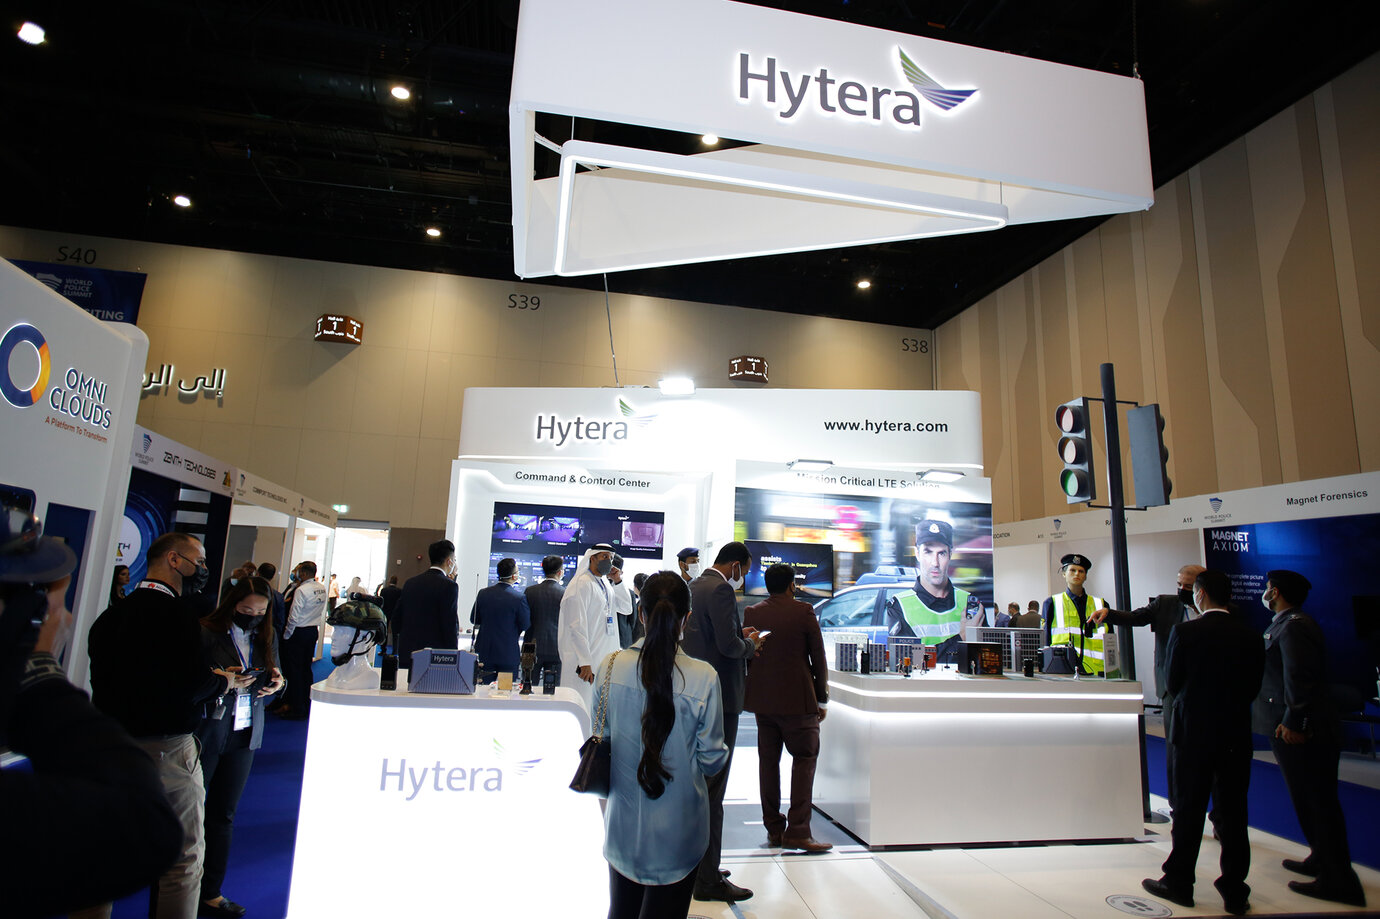 Hytera booth at World Police Summit crowd as usual